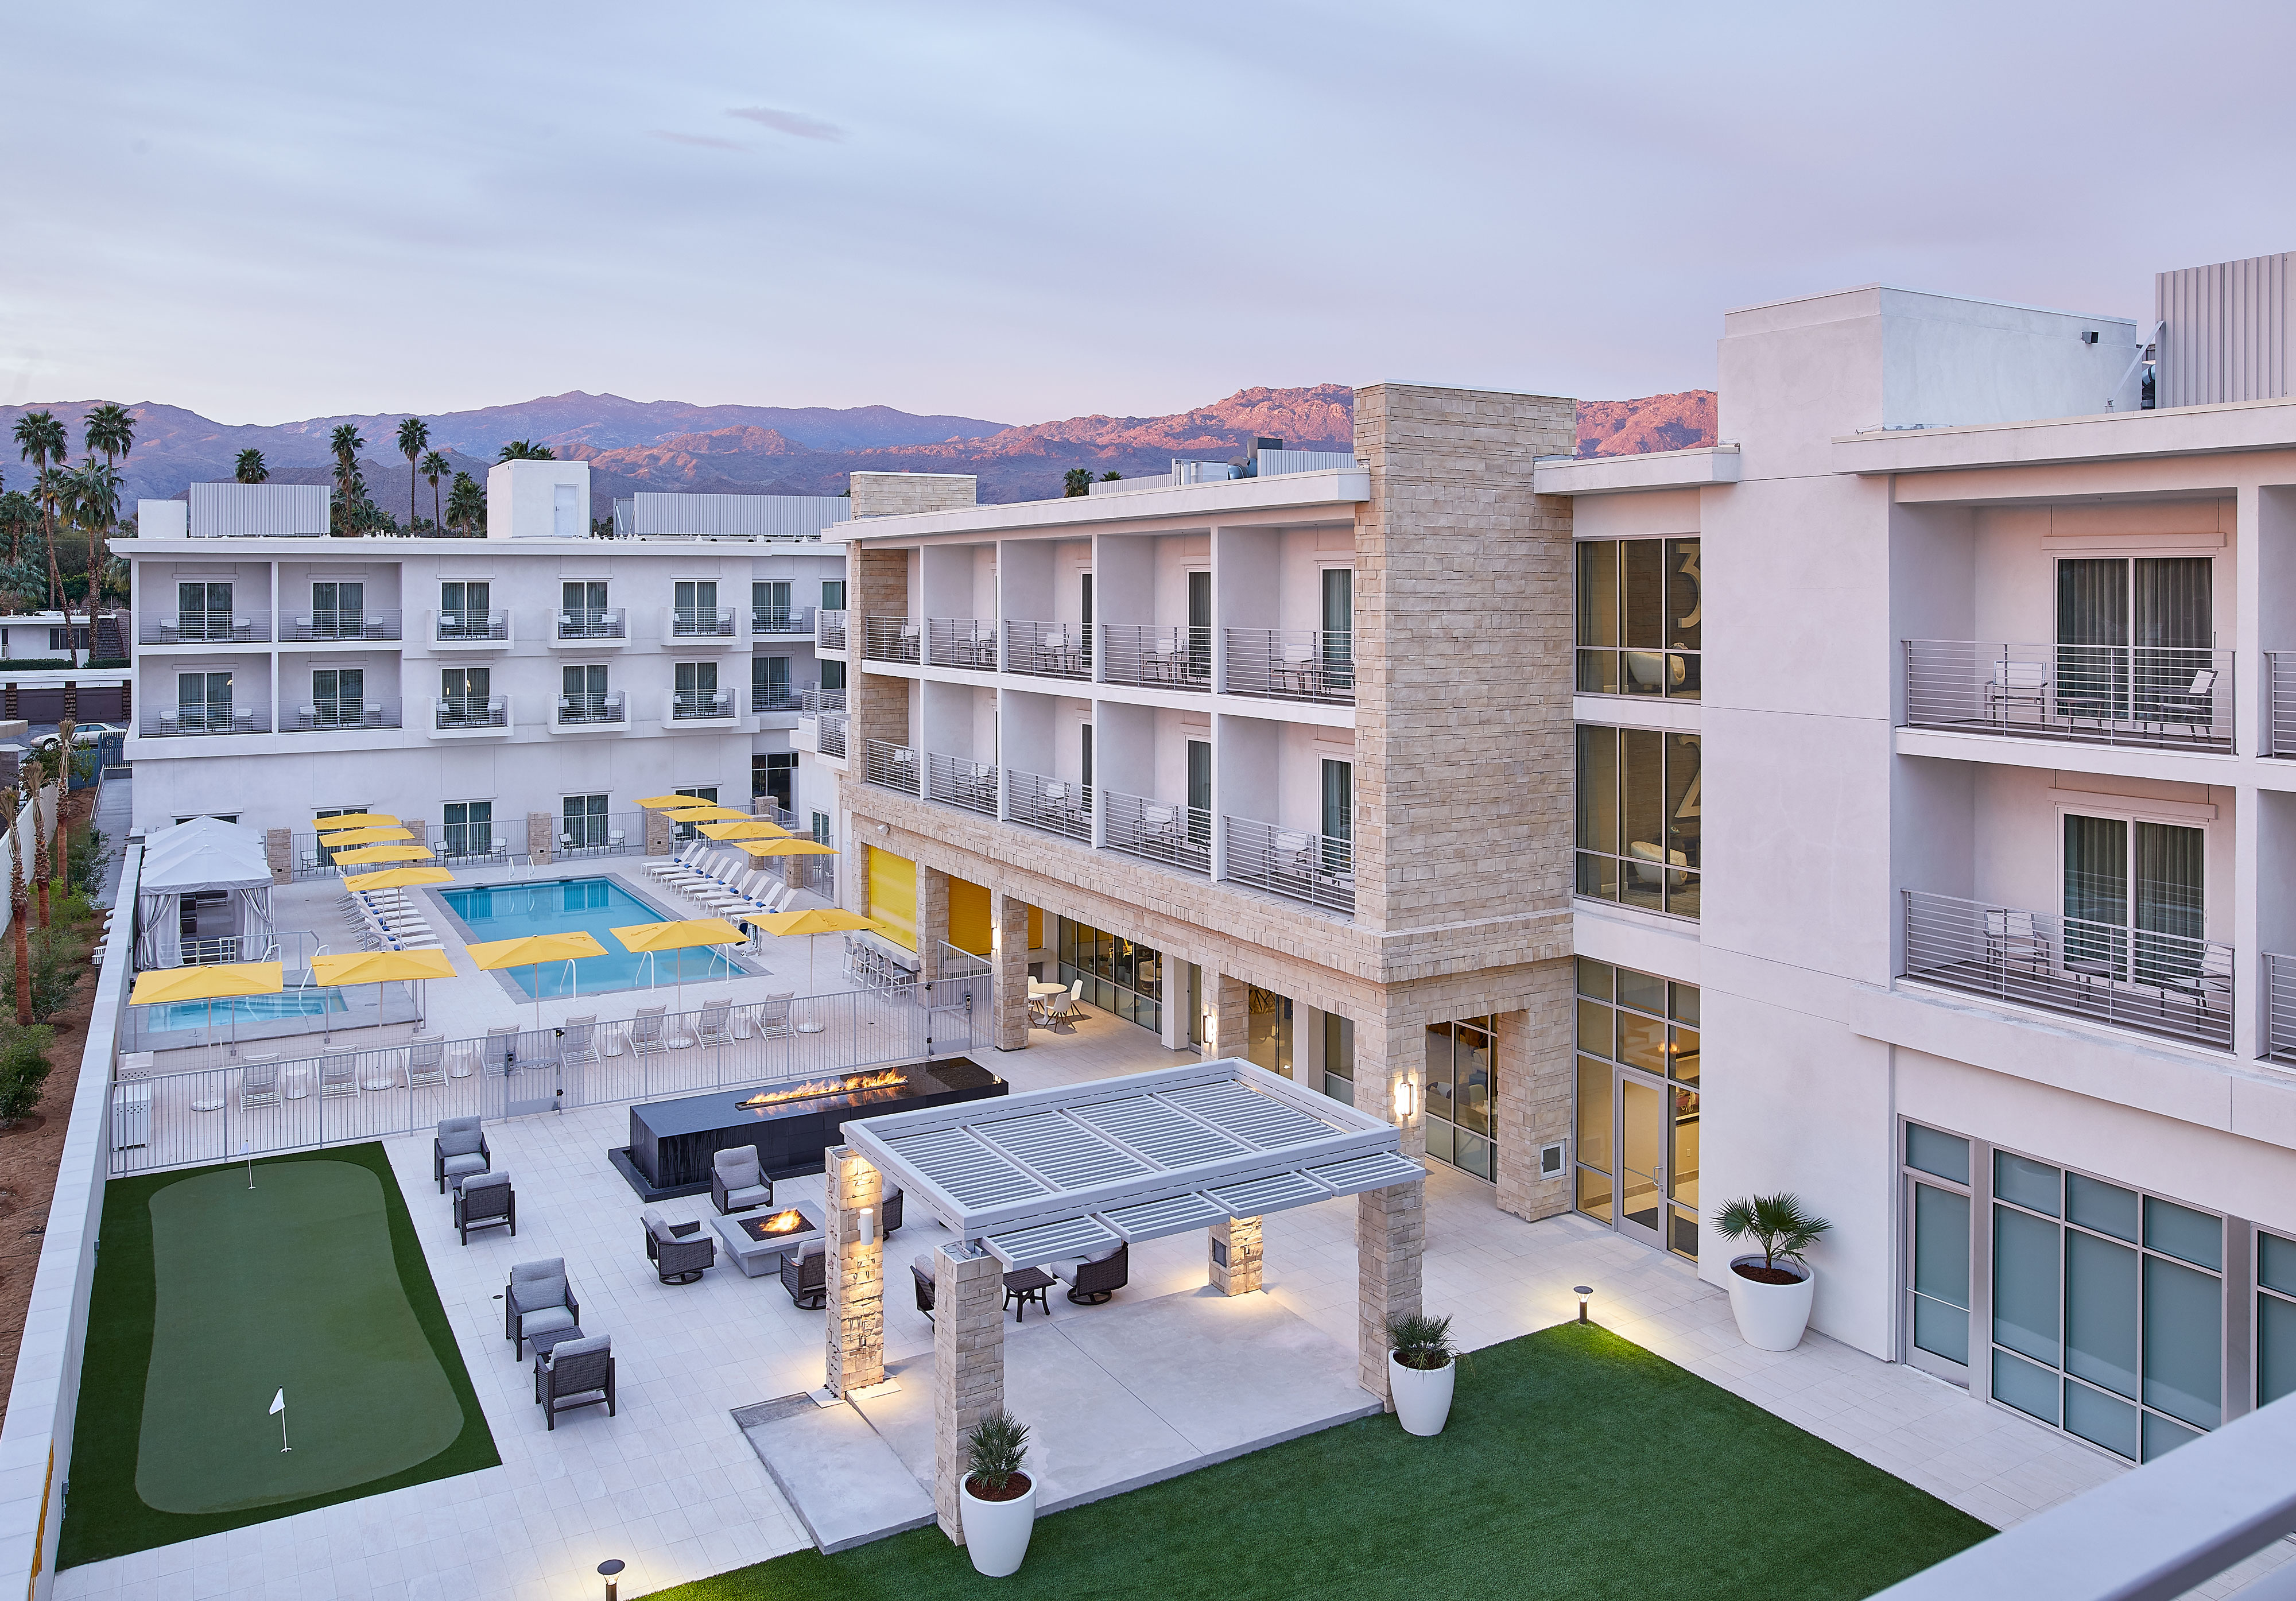 Hotel Paseo officially opens in Palm Desert, Calif.